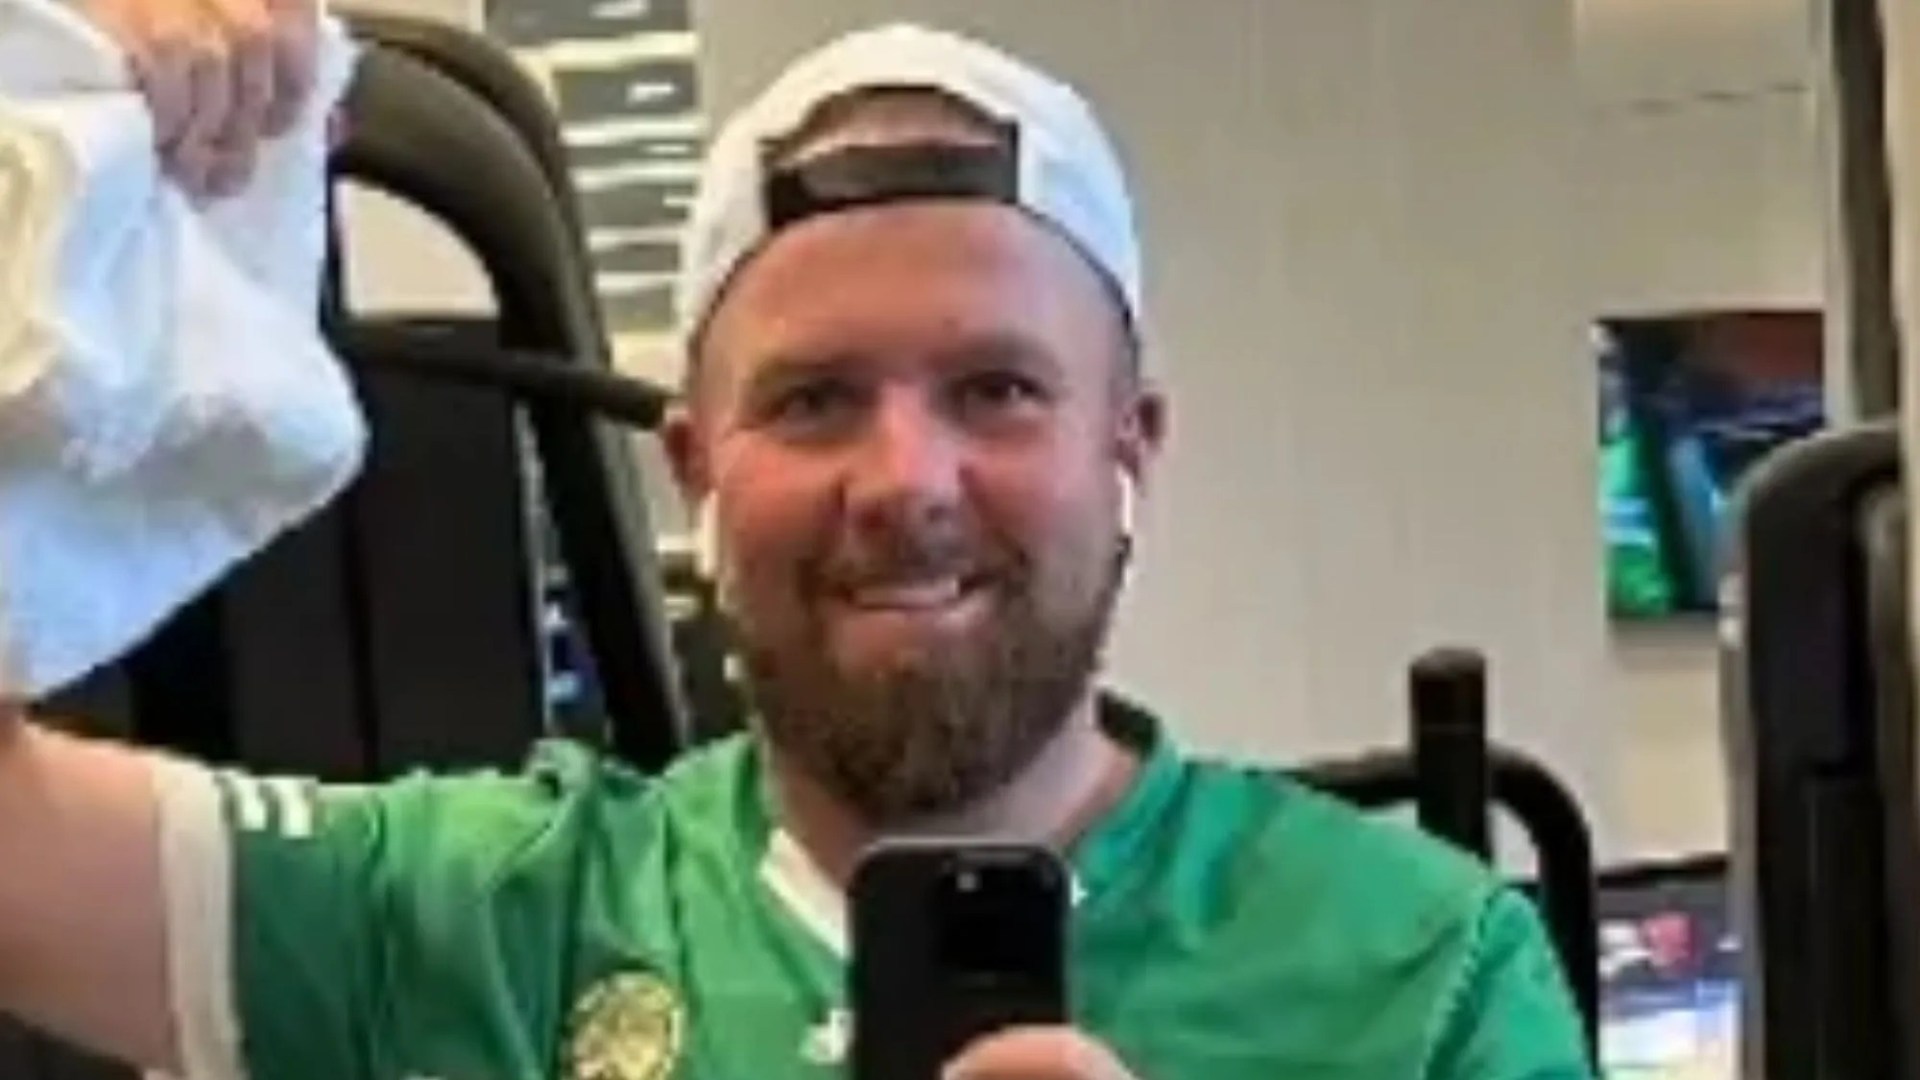 Beaming Shane Lowry says ‘only thing worth wearing’ as he dons Offaly GAA jersey to gym while revealing fitting playlist [Video]